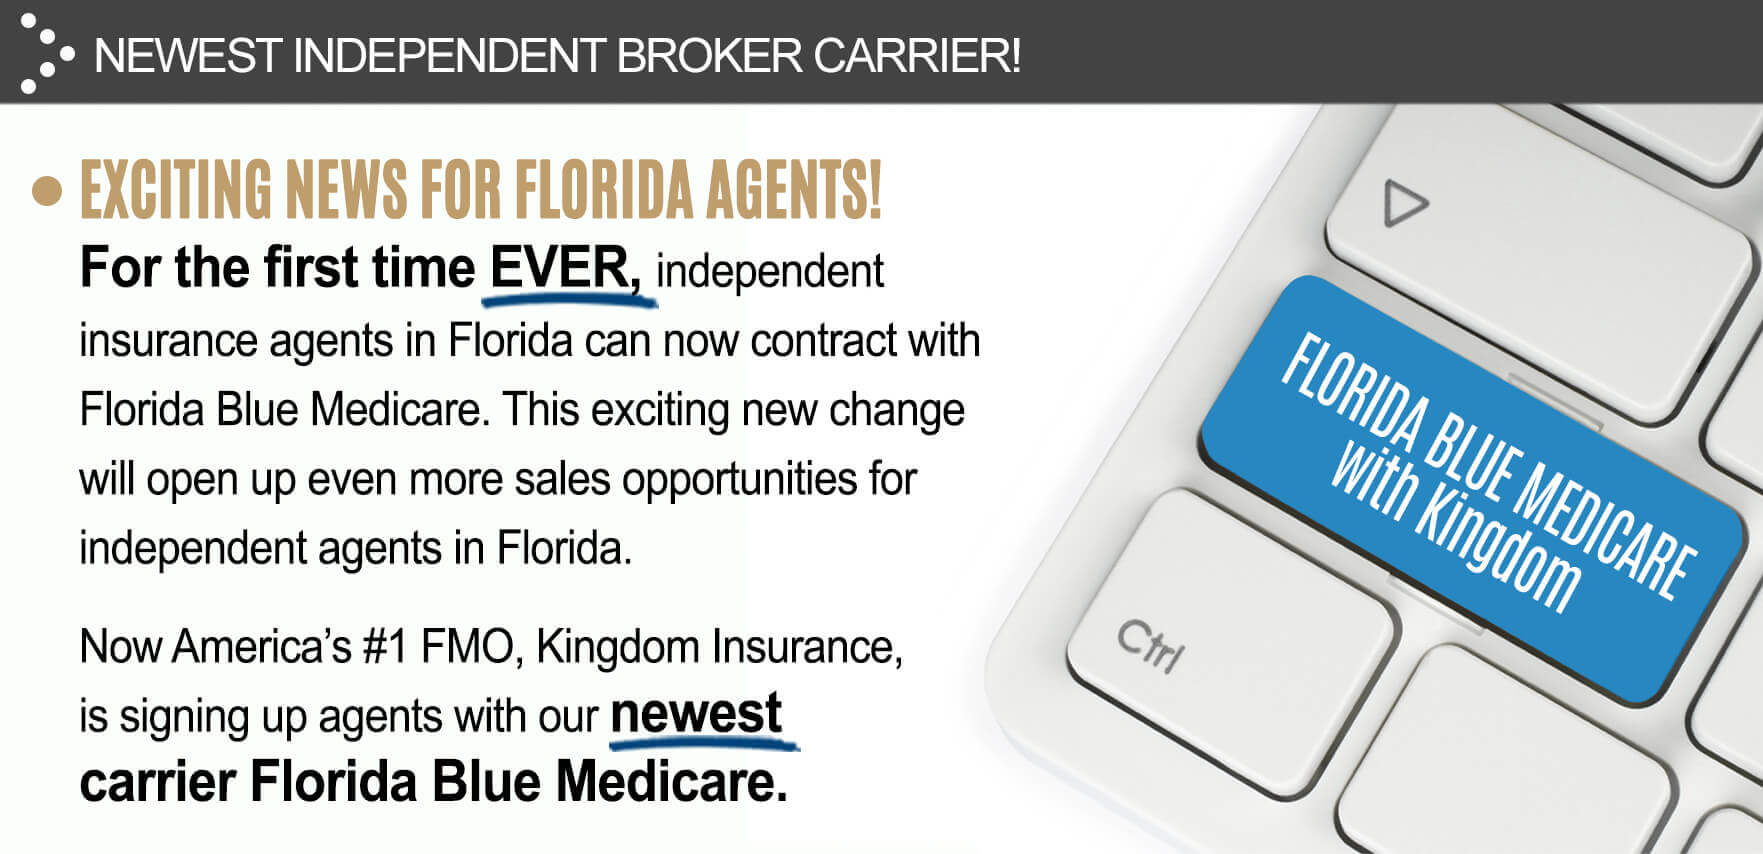 Newest Independent broker carrier! Exciting news for Florida agents! For the first time ever, independent insurance agents in Florida can now contract with Florida Blue Medicare. This exciting new change will open up even more sales opportunities for independent agents in Florida. Now America’s #1 FMO, Kingdom Insurance, is signing up agents with our newest carrier Florida Blue Medicare.